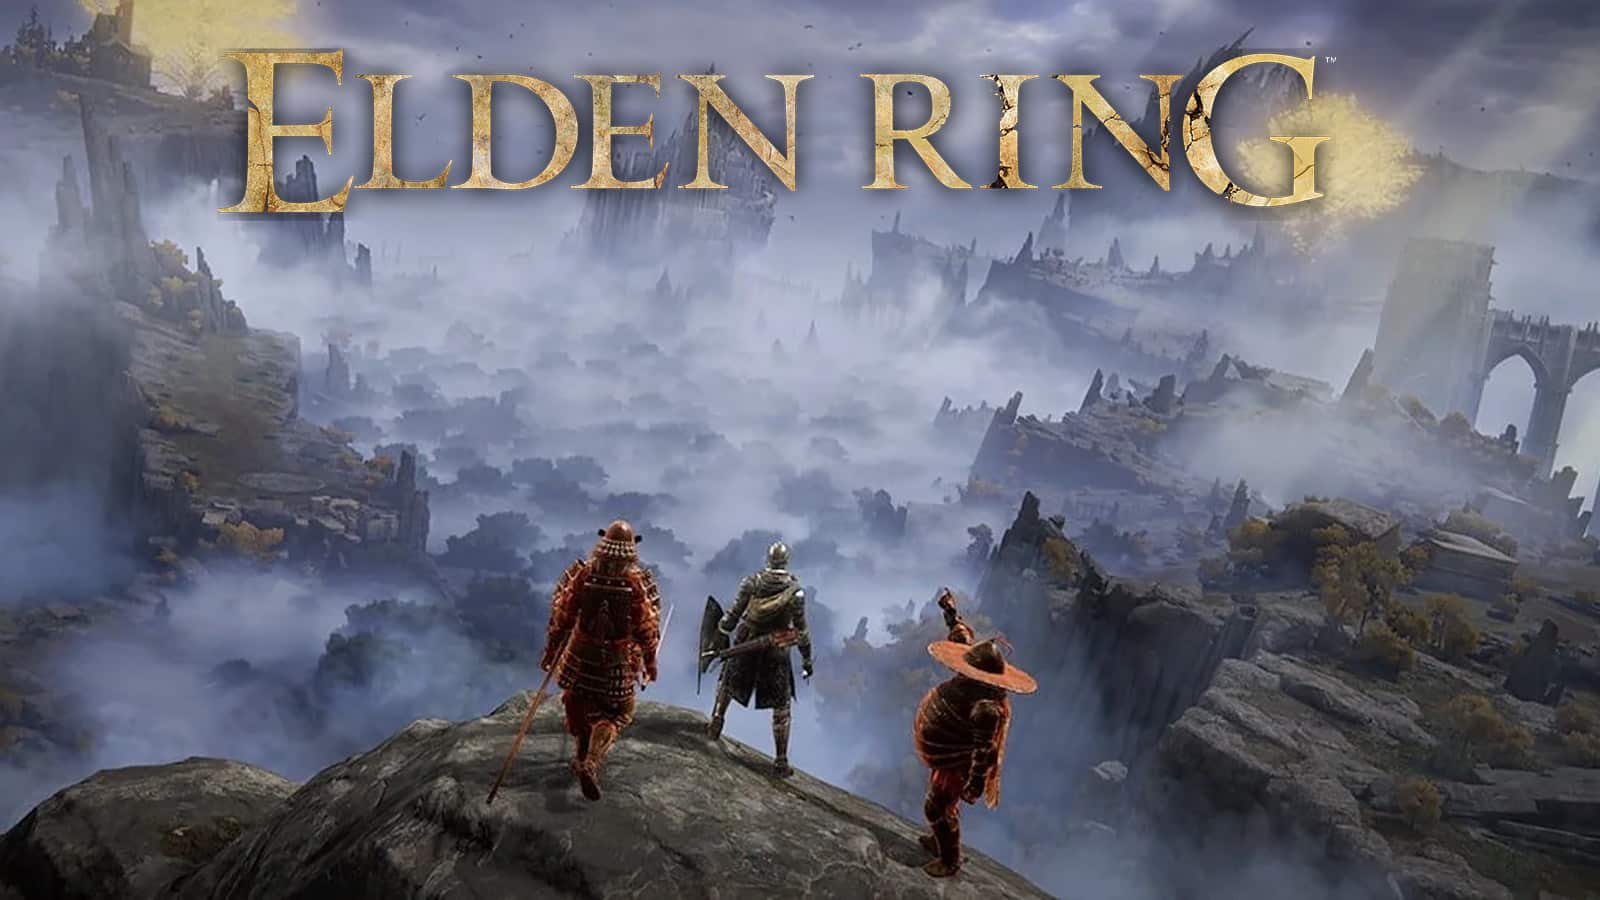 How many people play Elden Ring